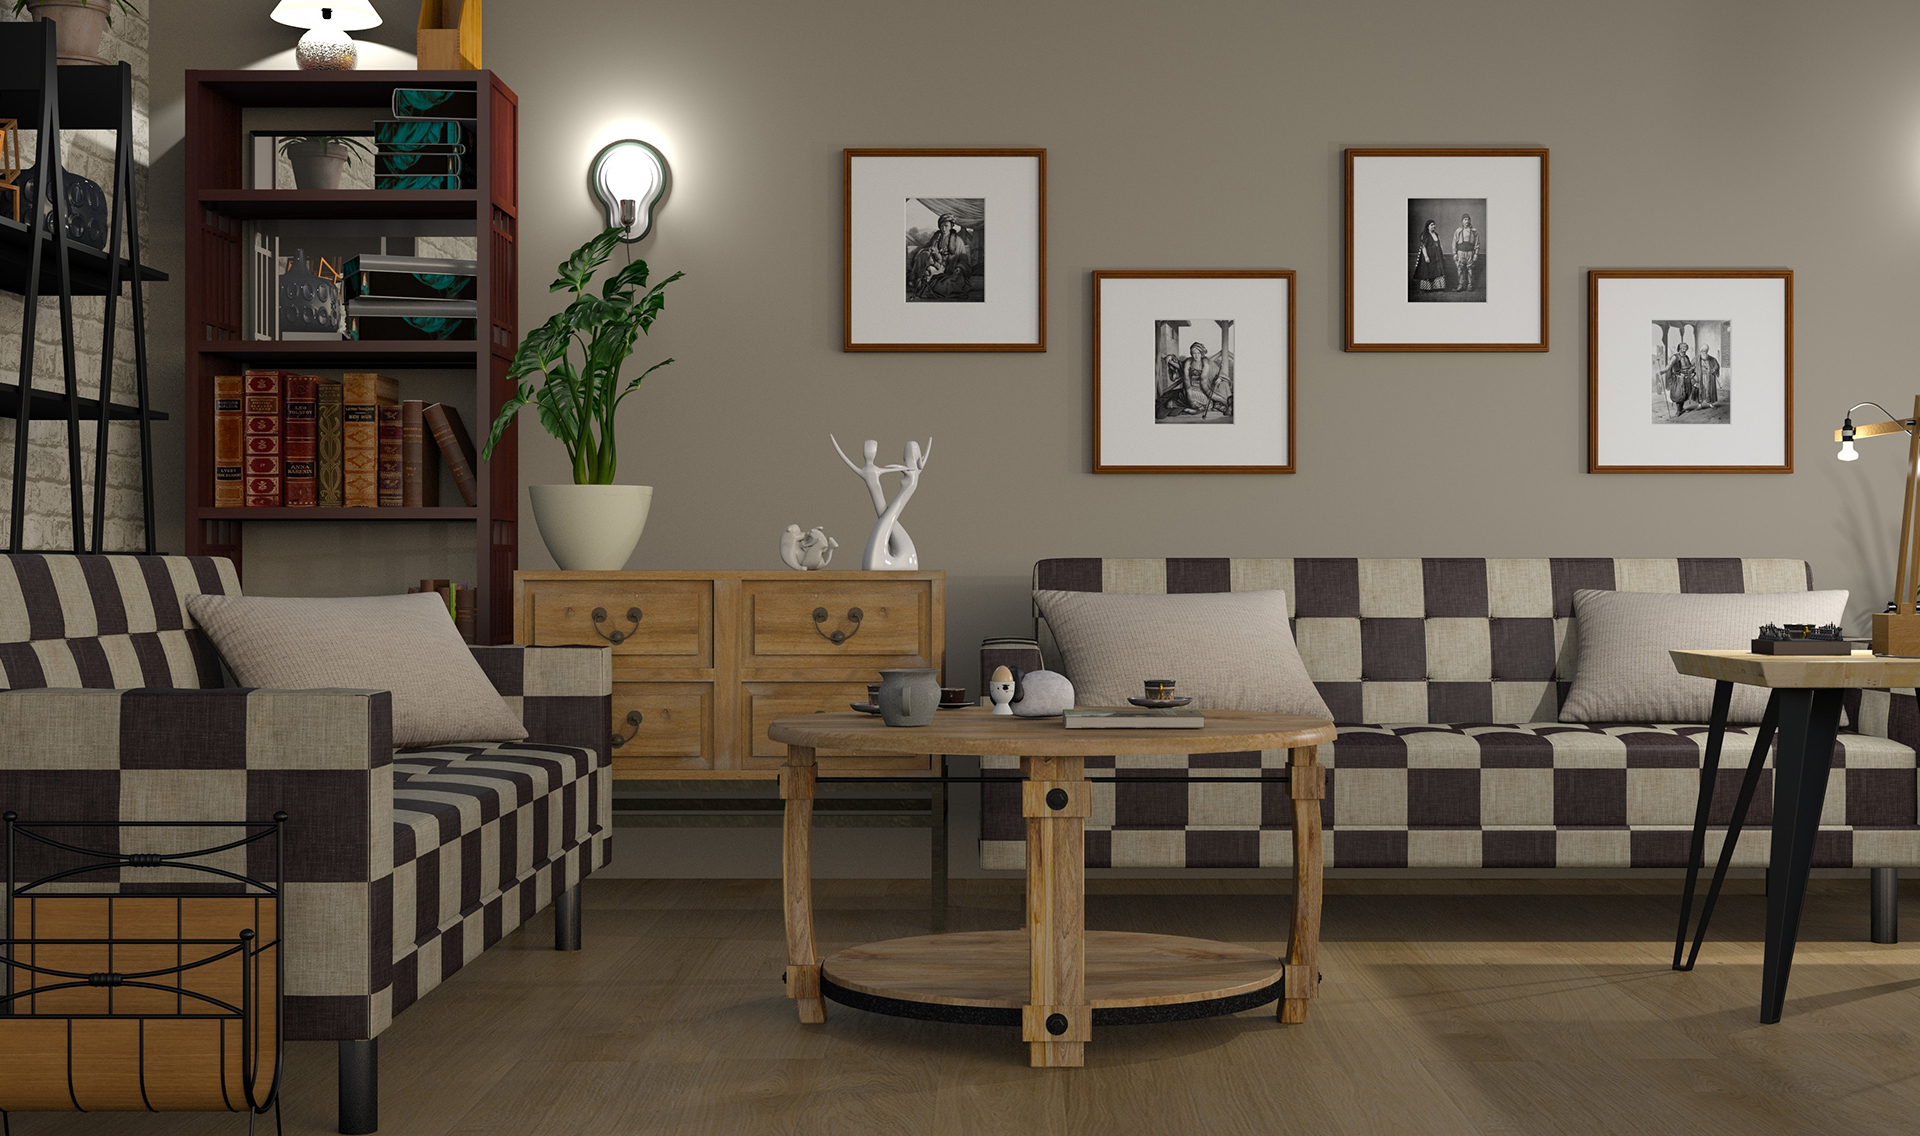 INT. CHEQUERED LIVING ROOM – DAY